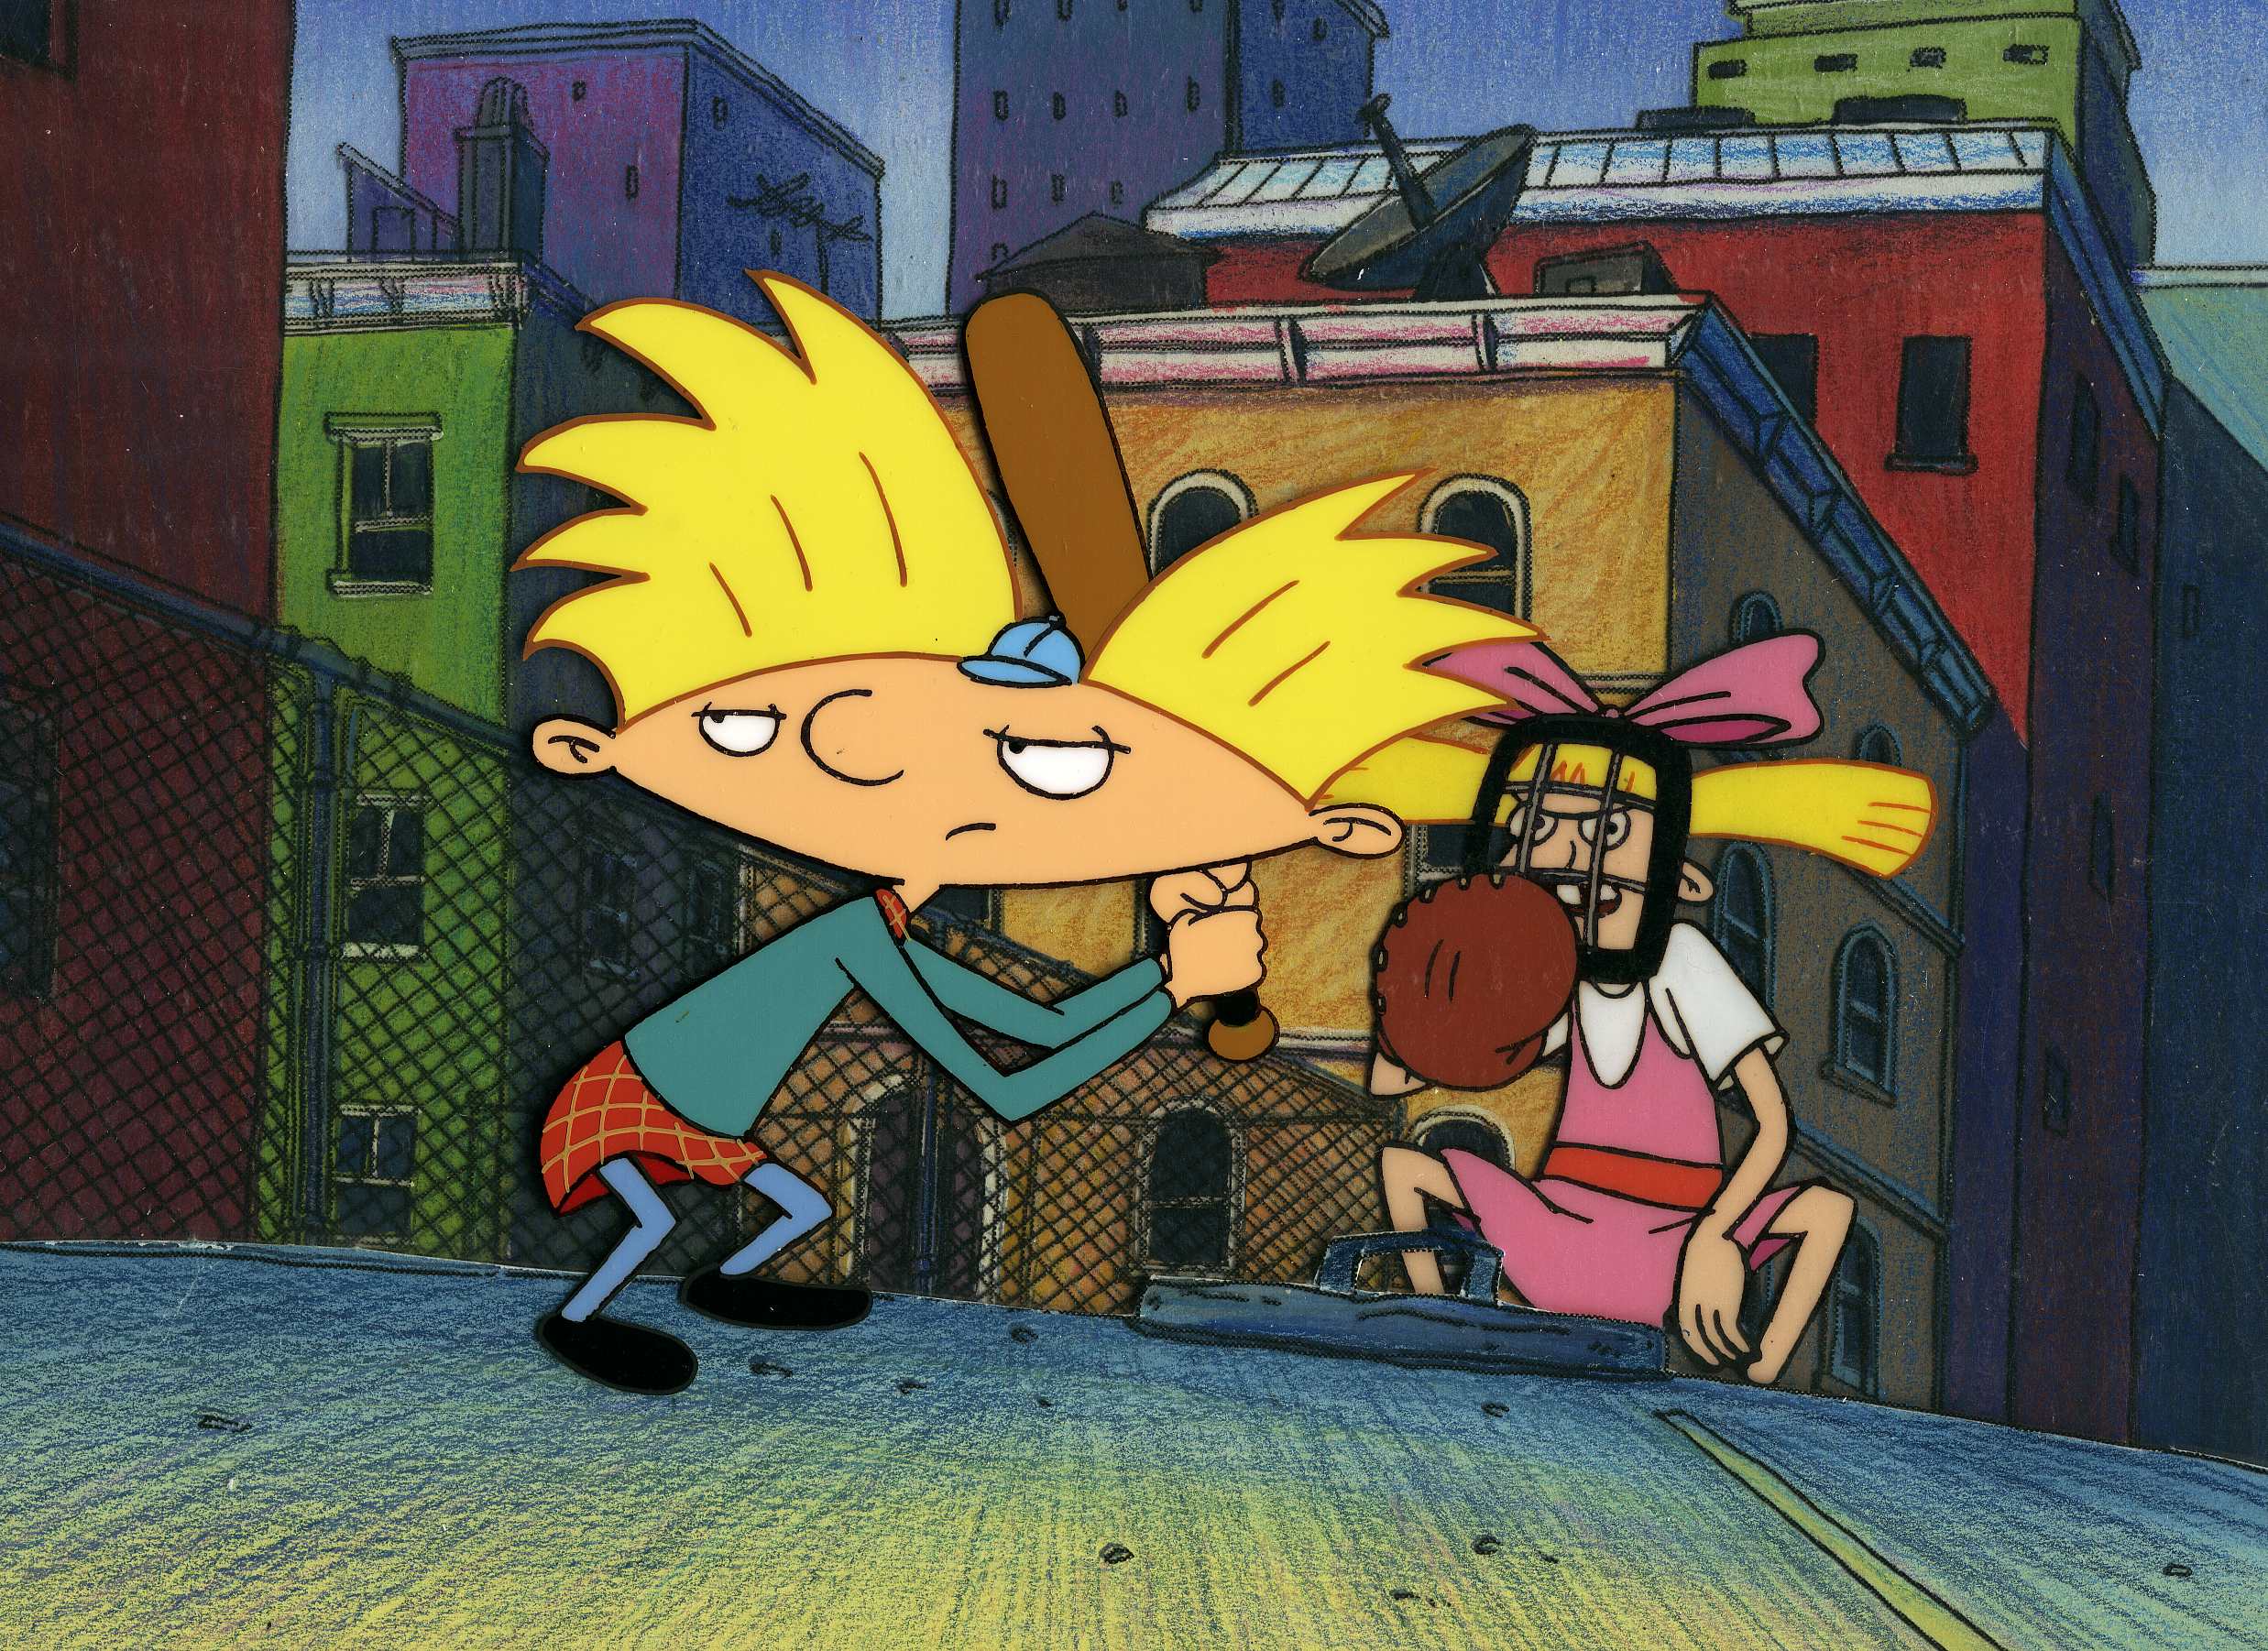 Hey Arnold! Backgrounds, Compatible - PC, Mobile, Gadgets| 2475x1802 px